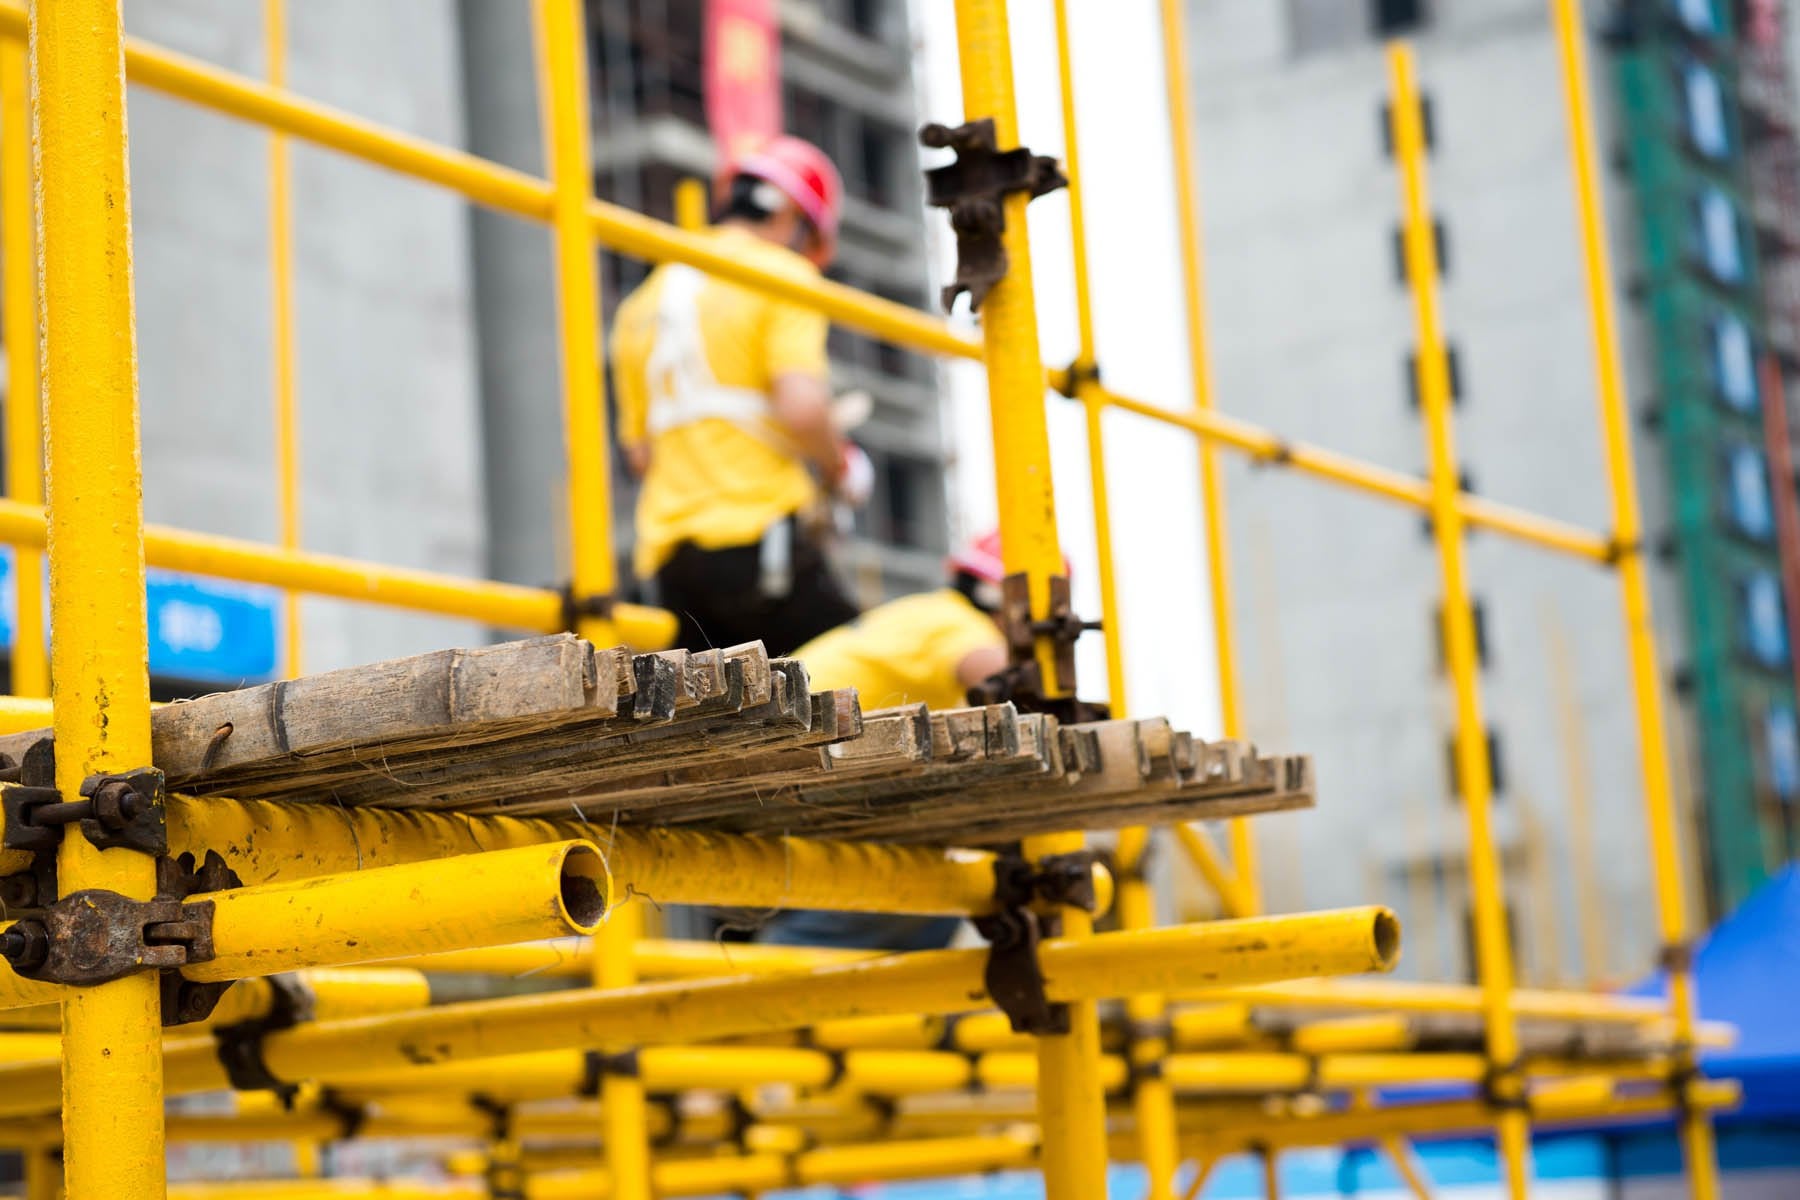 BuildEquip: Your Trusted Partner in Construction Equipment Solutions